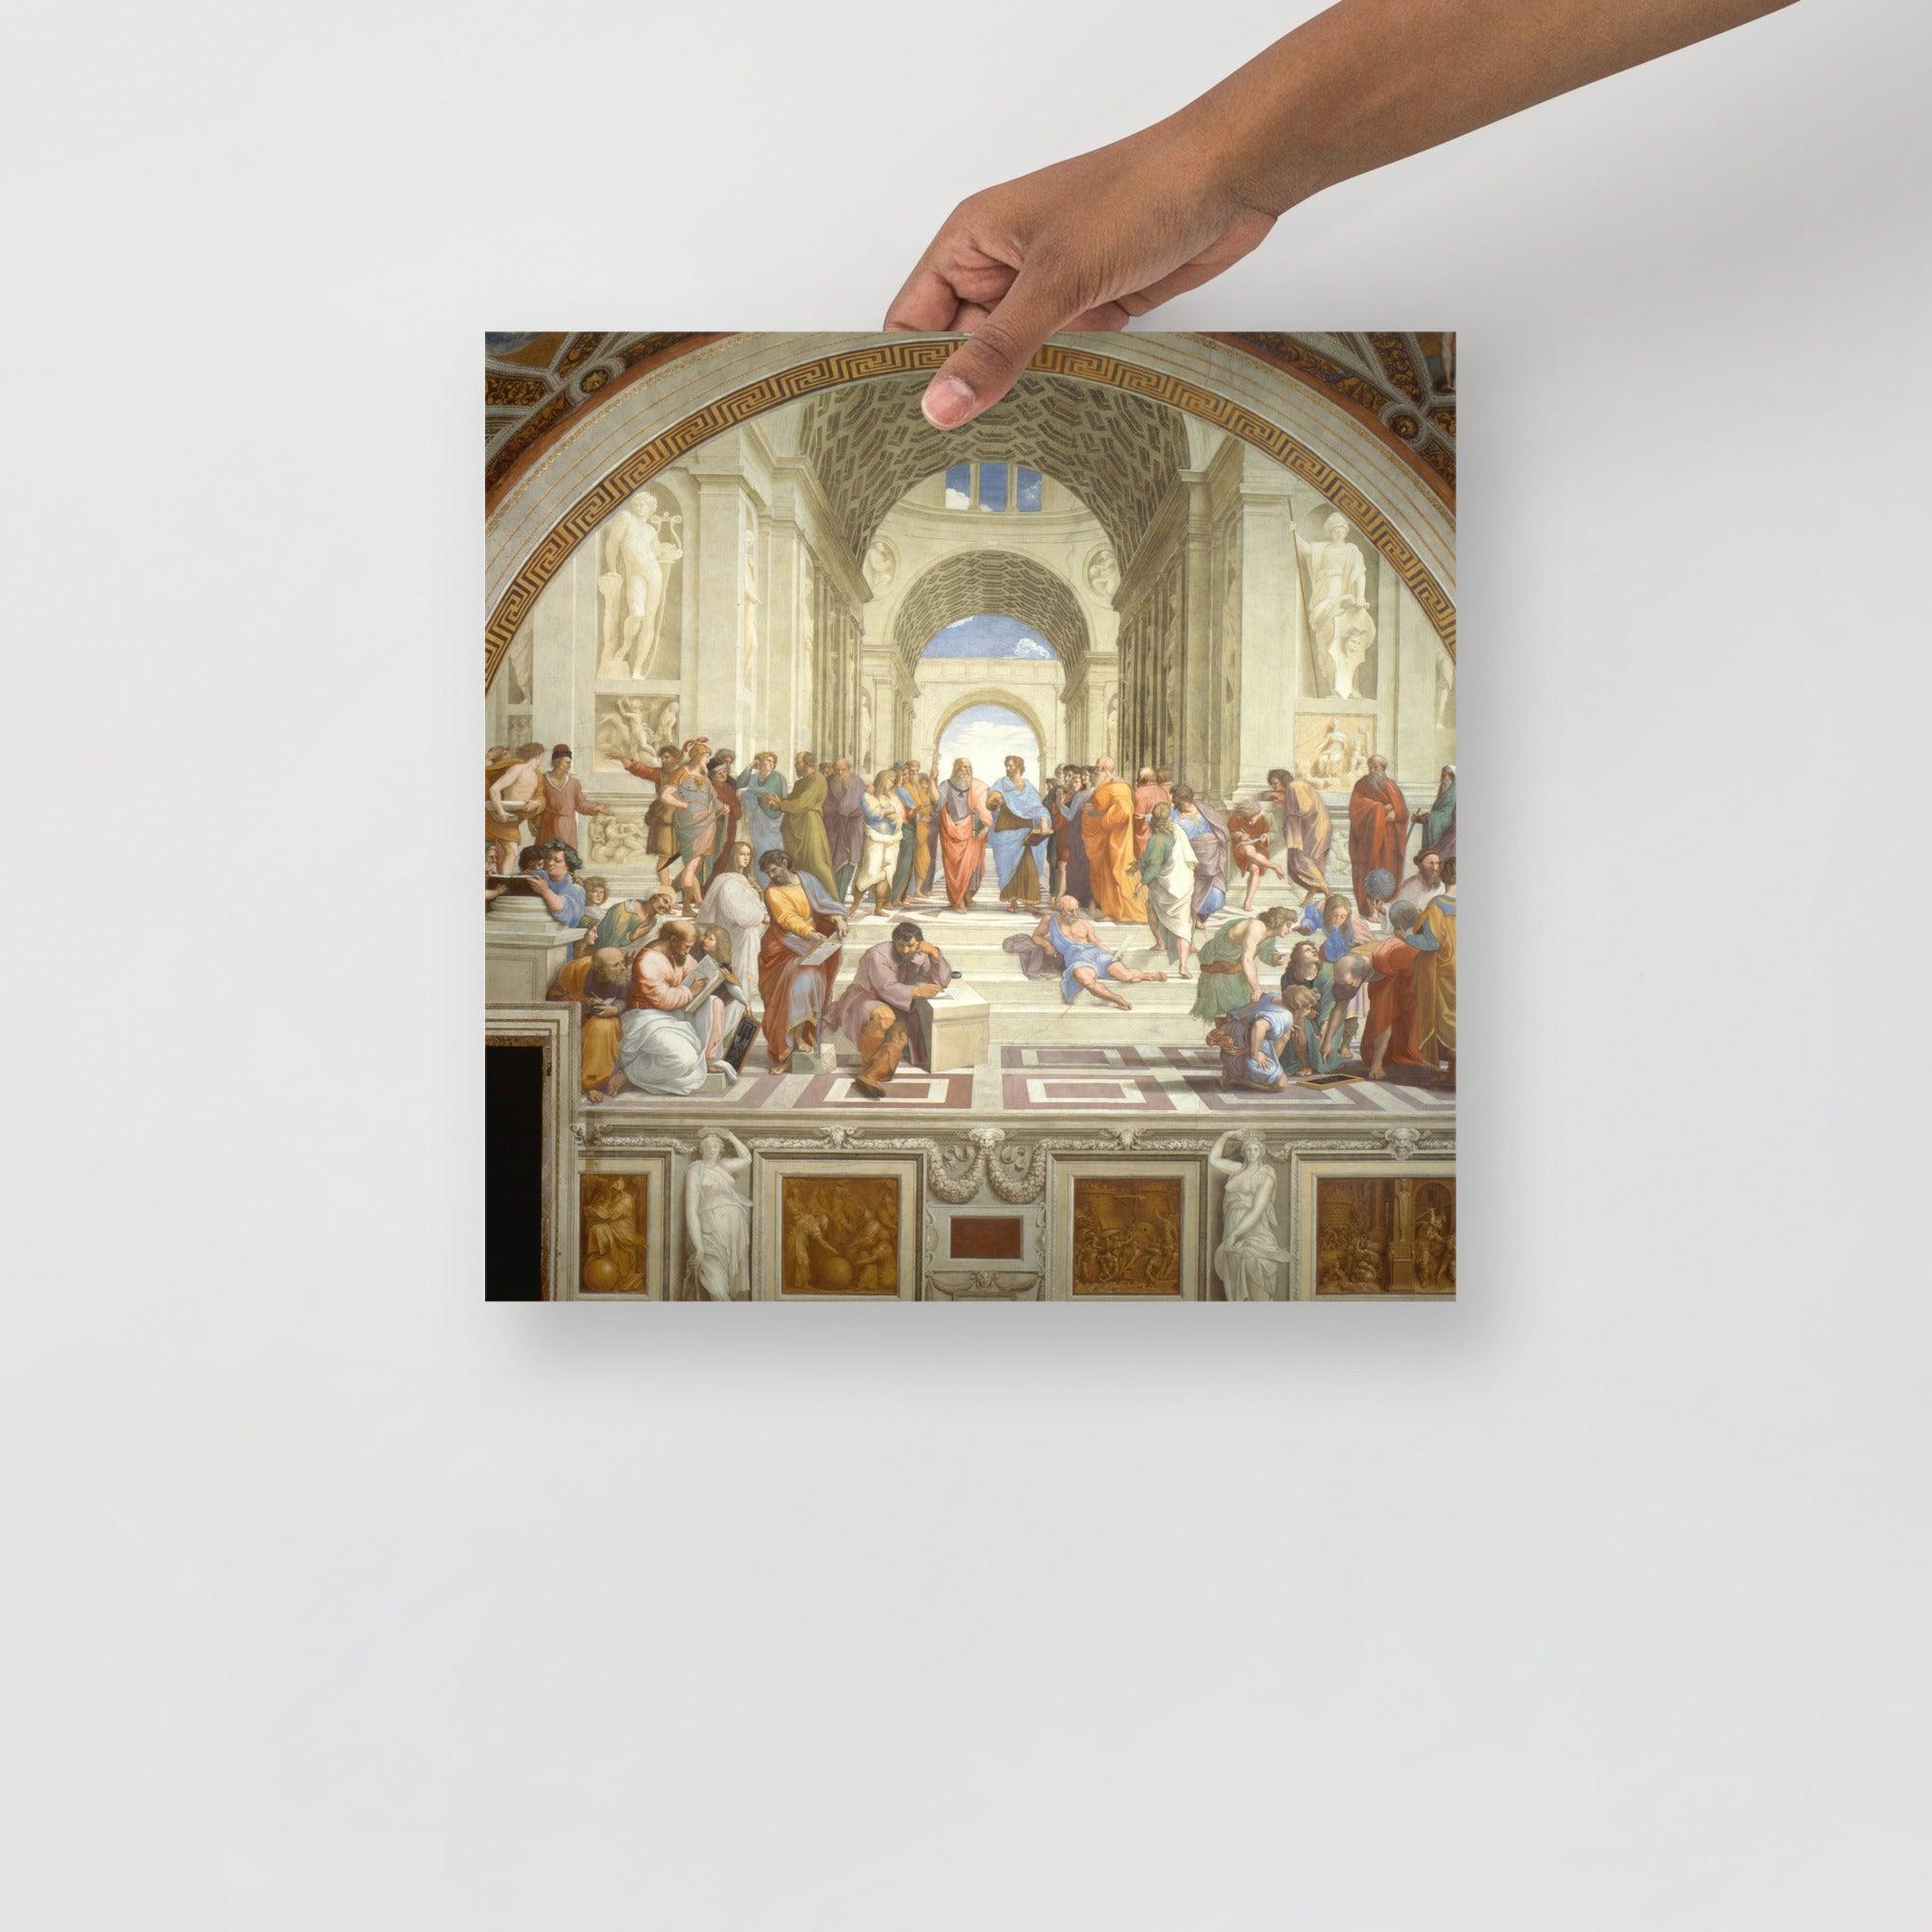 The School of Athens by Raphael poster on a plain backdrop in size 14x14”.